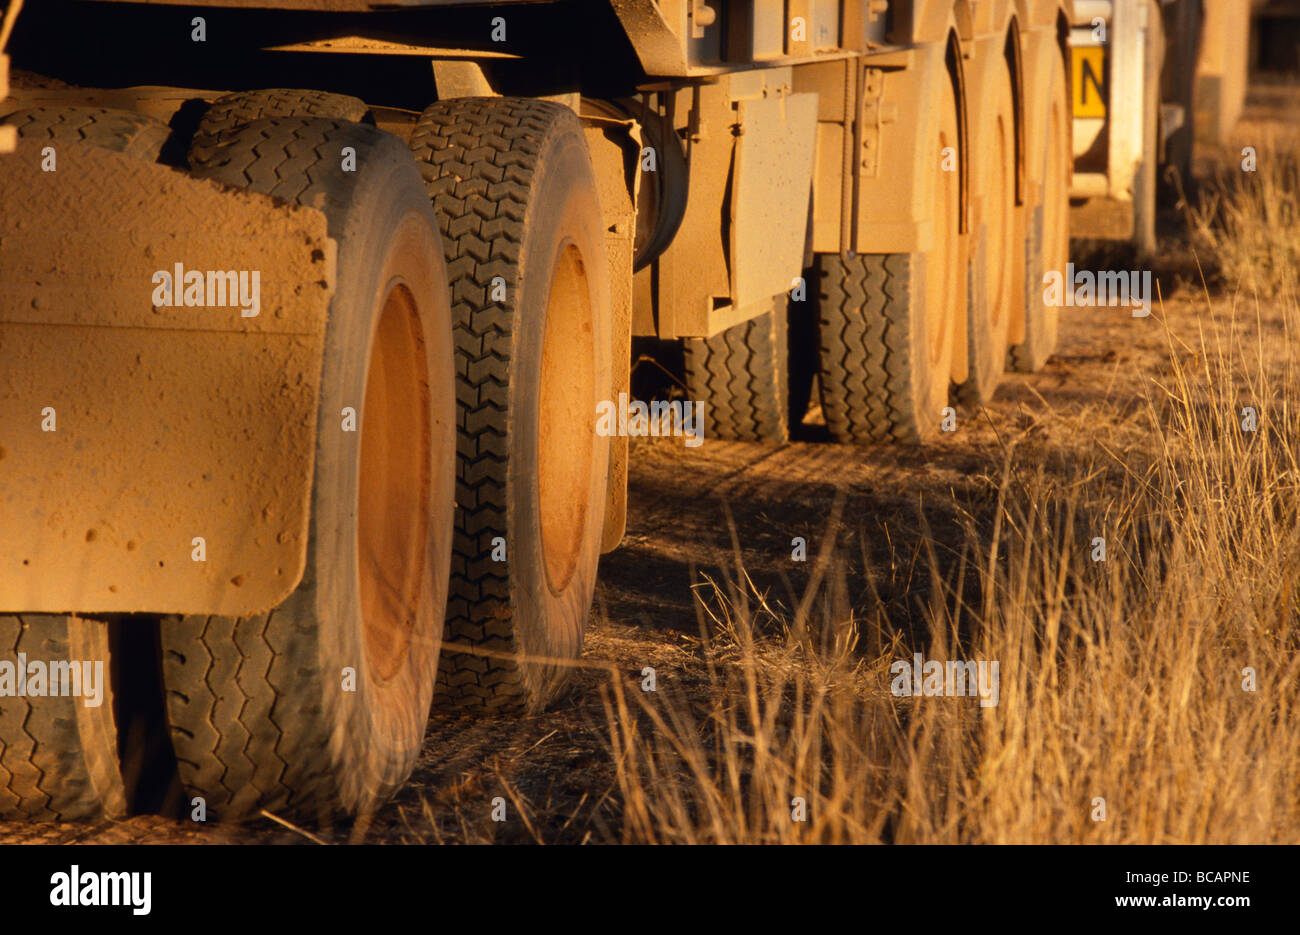 The dusty wheels of a Long-Haul Truck, also called a Road Train. Stock Photo